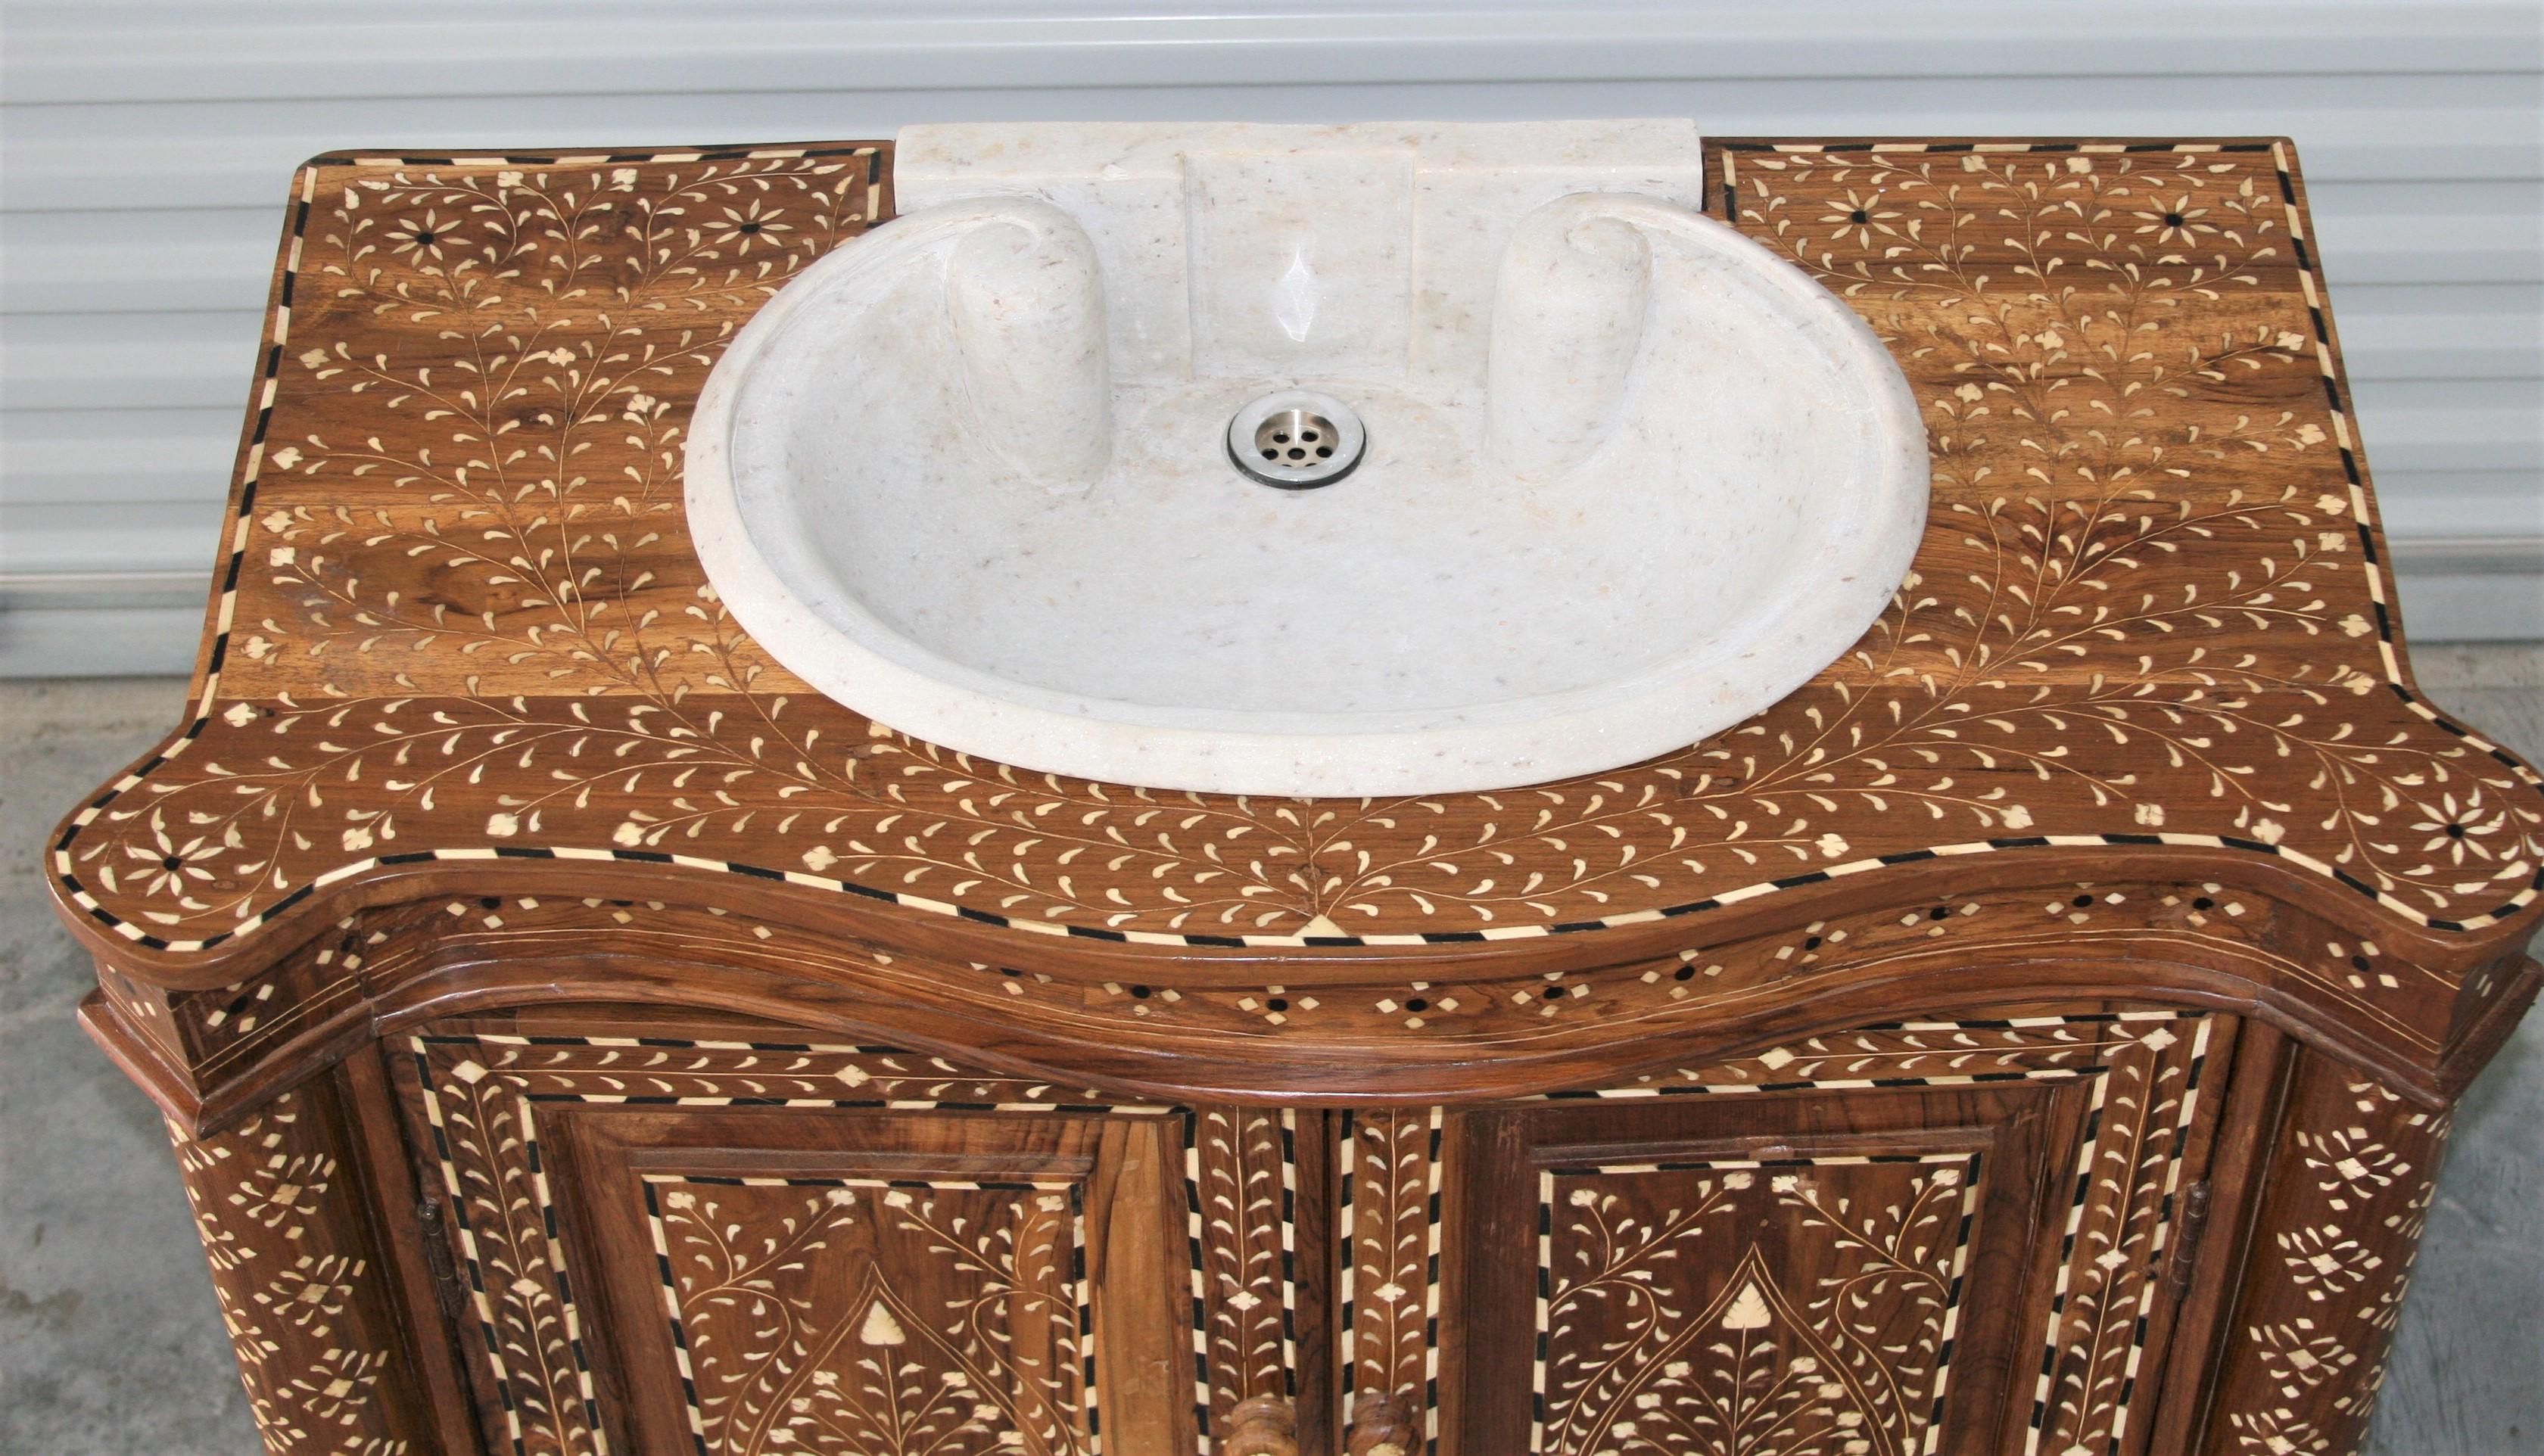 Contemporary Fine Marble Sink on Solid Teak Wood Vanity Exquisitely Hand Inlaid with Bone For Sale